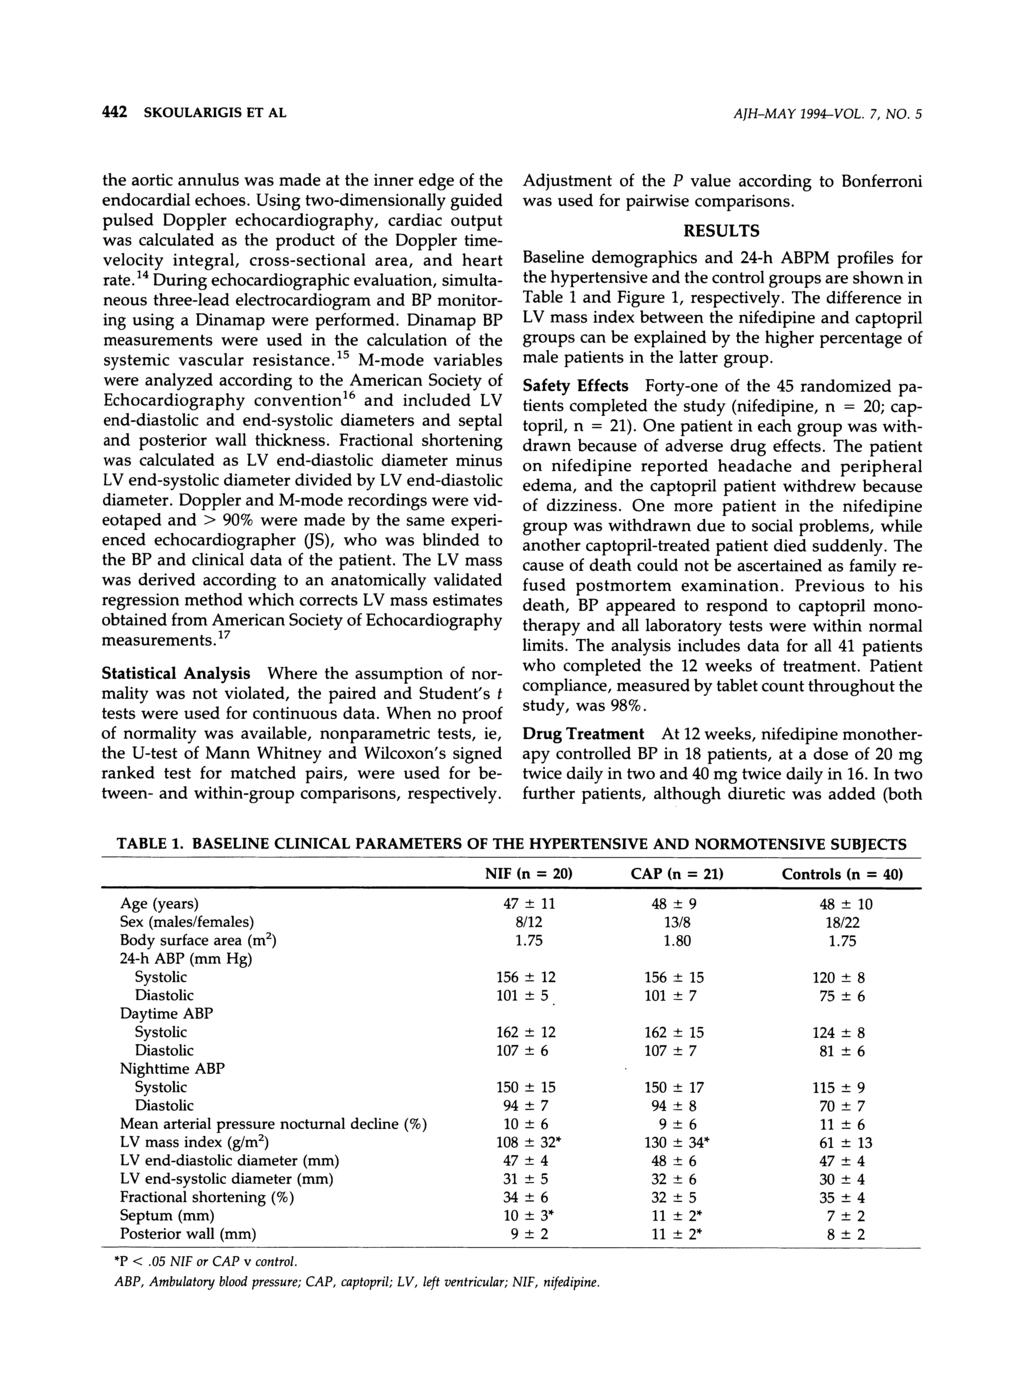 442 SKOULARIGIS ET AL AJH-MAY 1994-VOL. 7, NO. 5 the aortic annulus was made at the inner edge of the endocardial echoes.